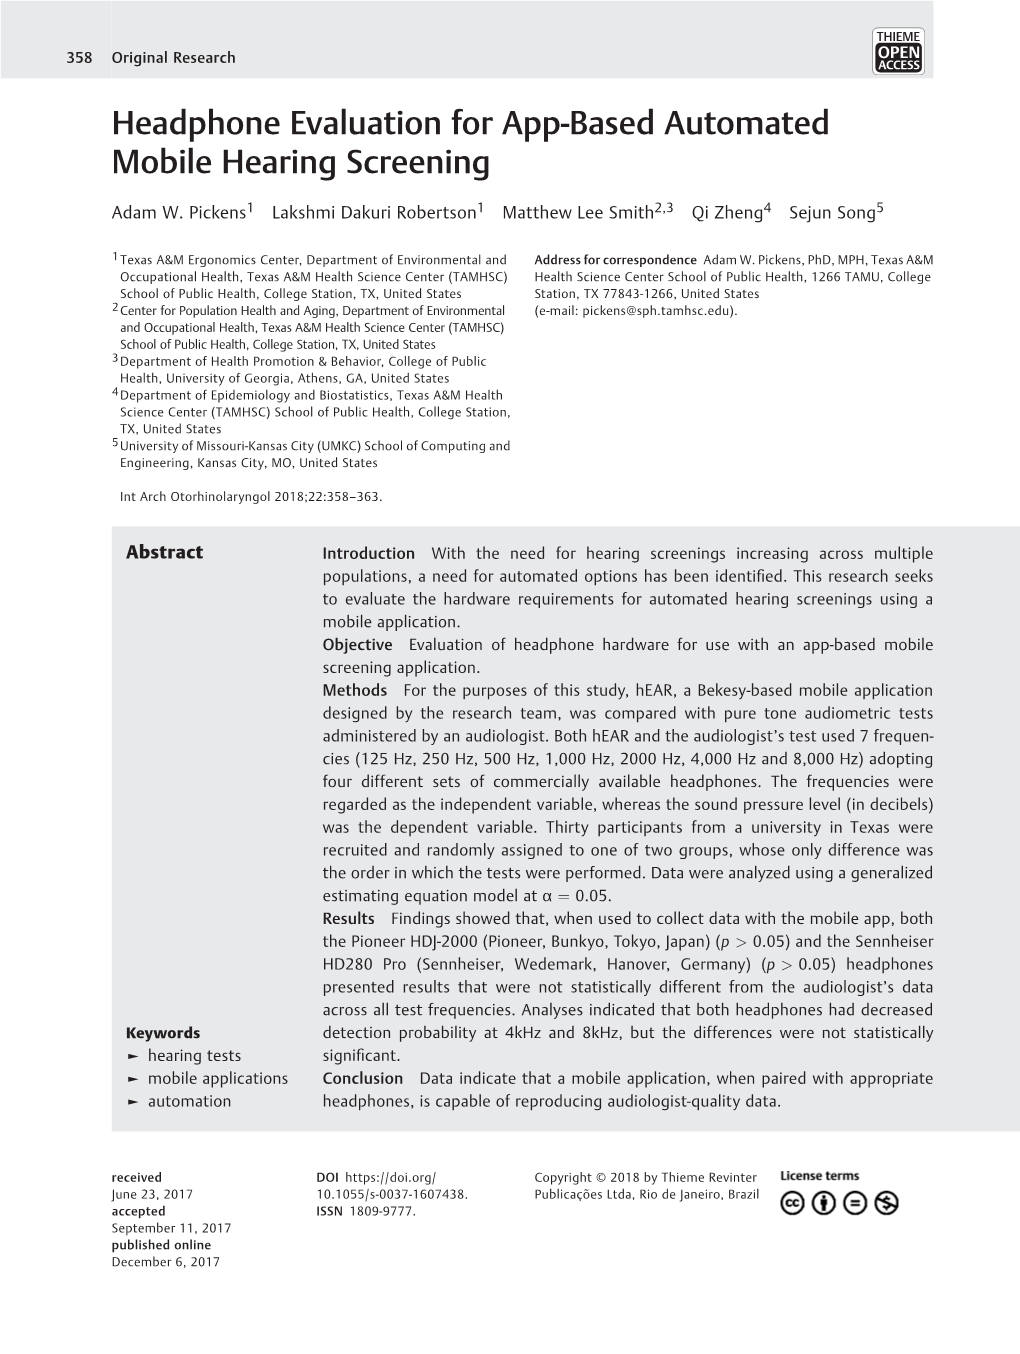 Headphone Evaluation for App-Based Automated Mobile Hearing Screening